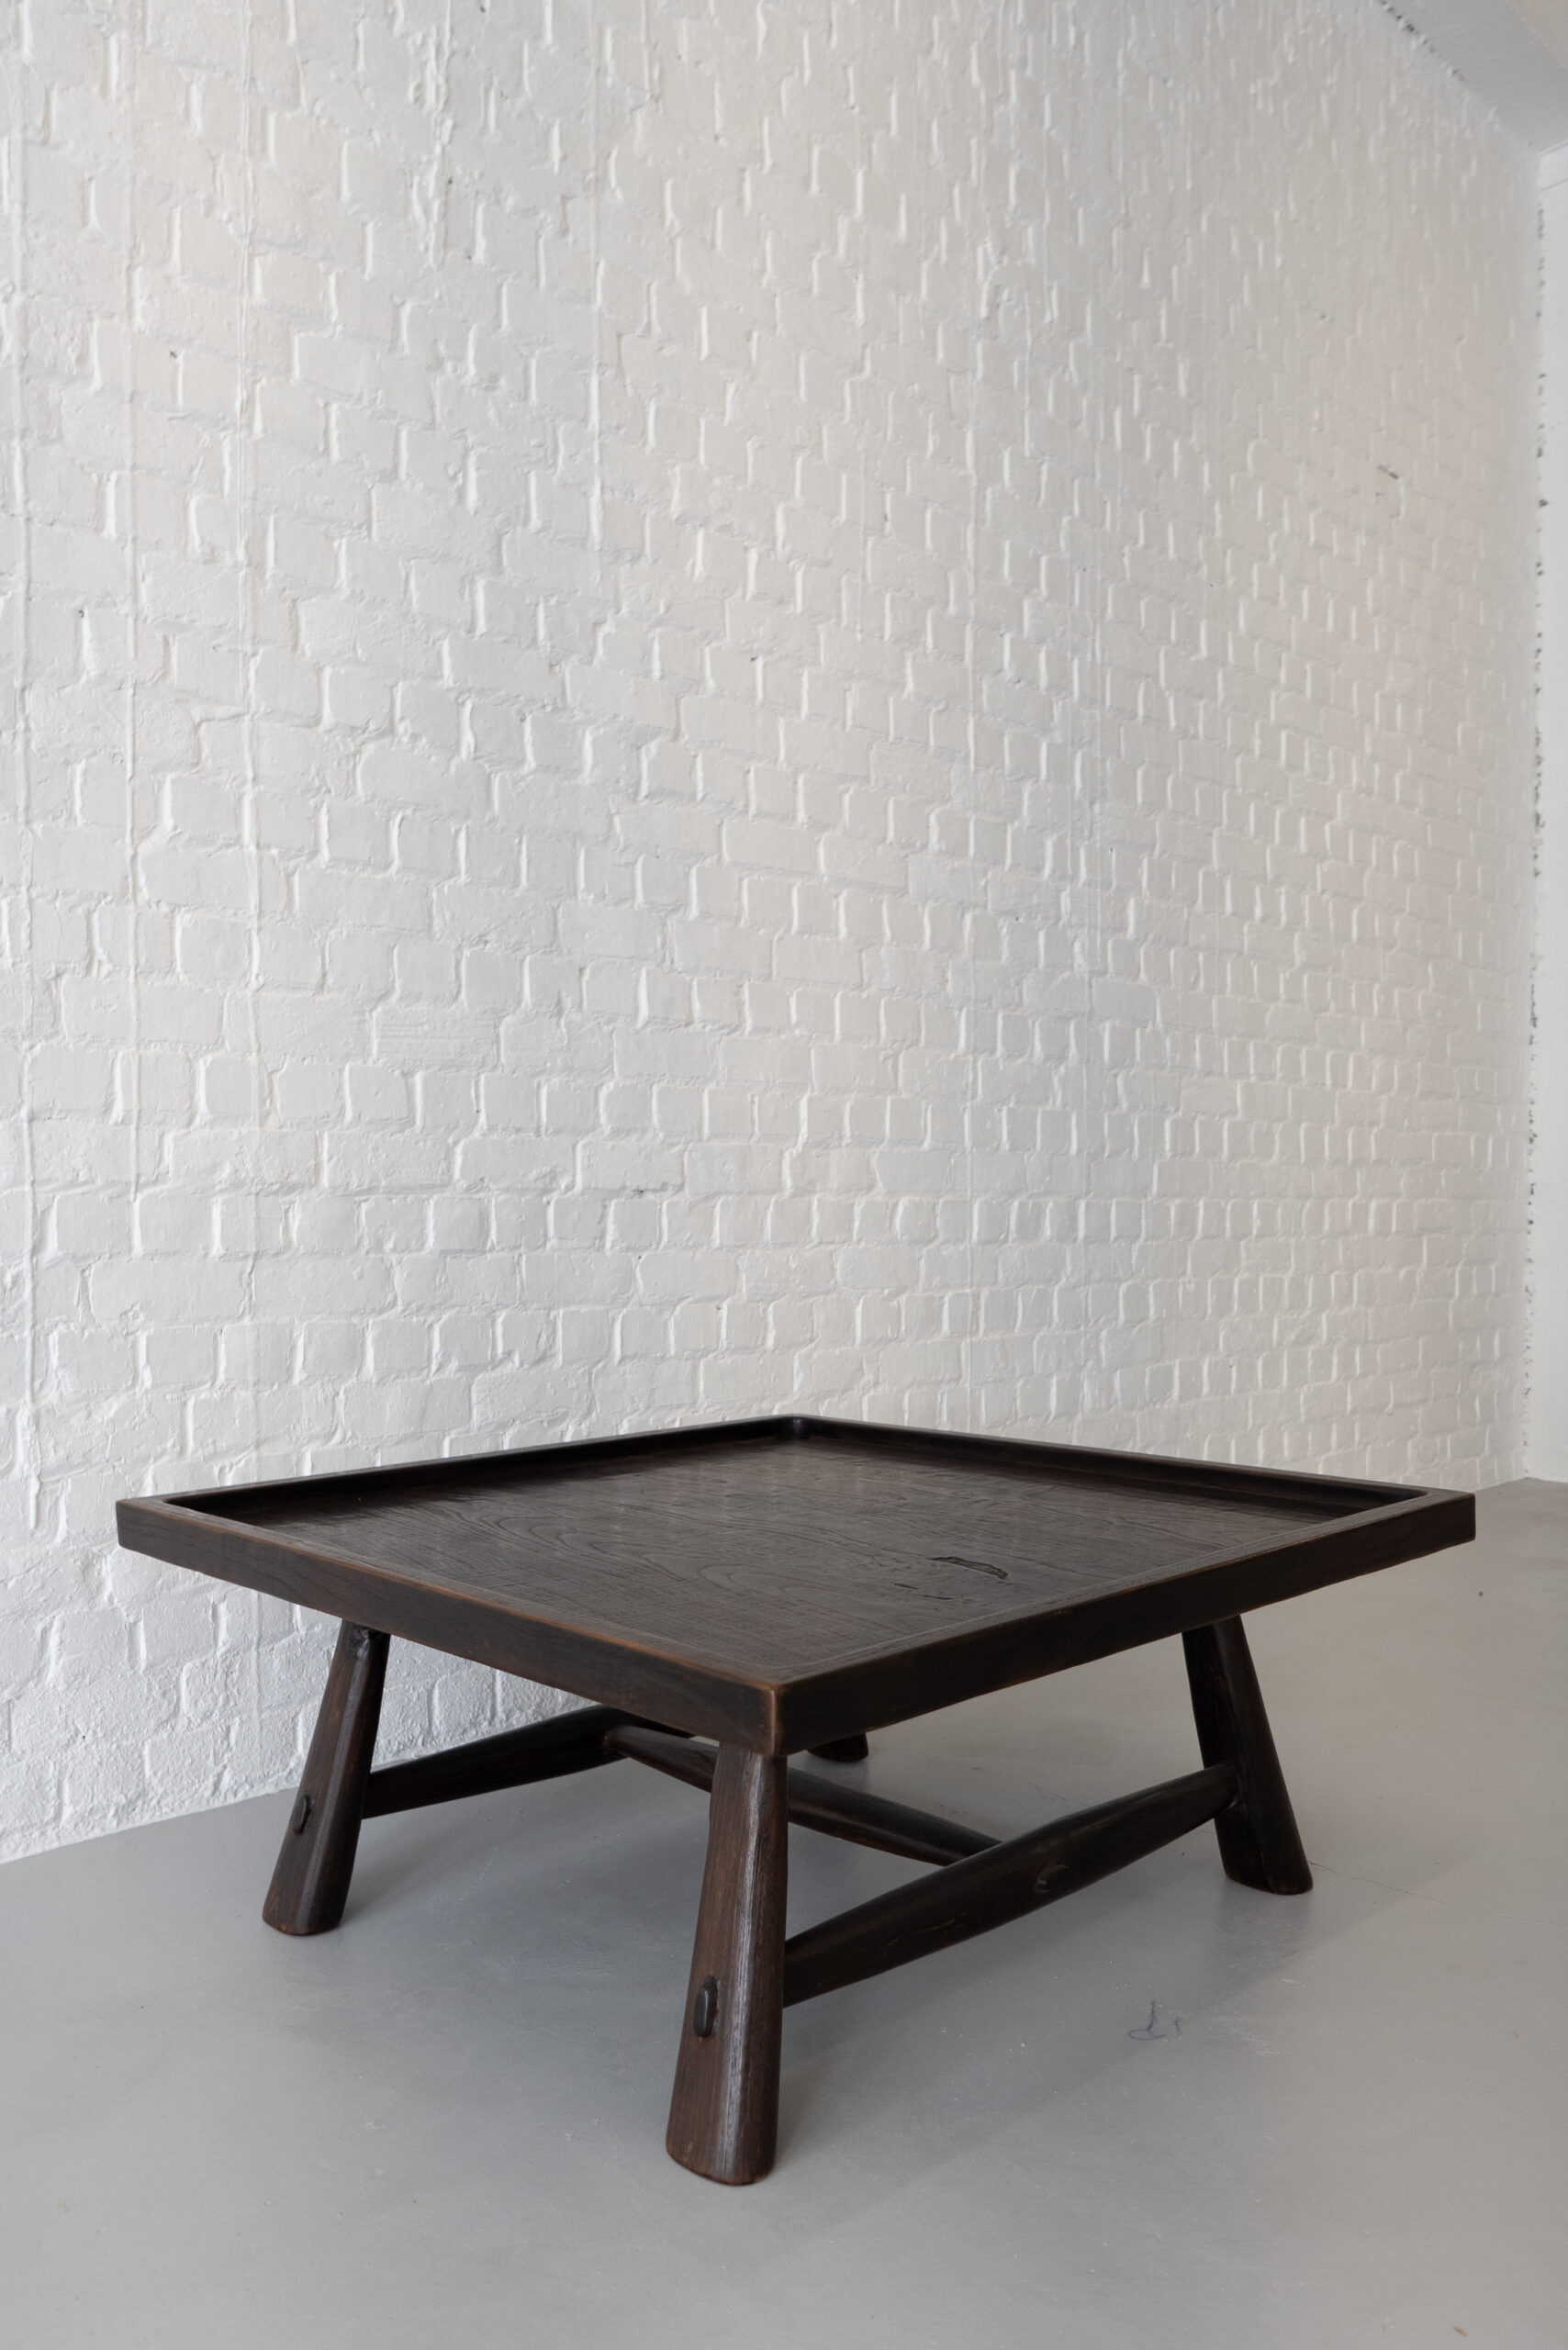 Indonesian low table